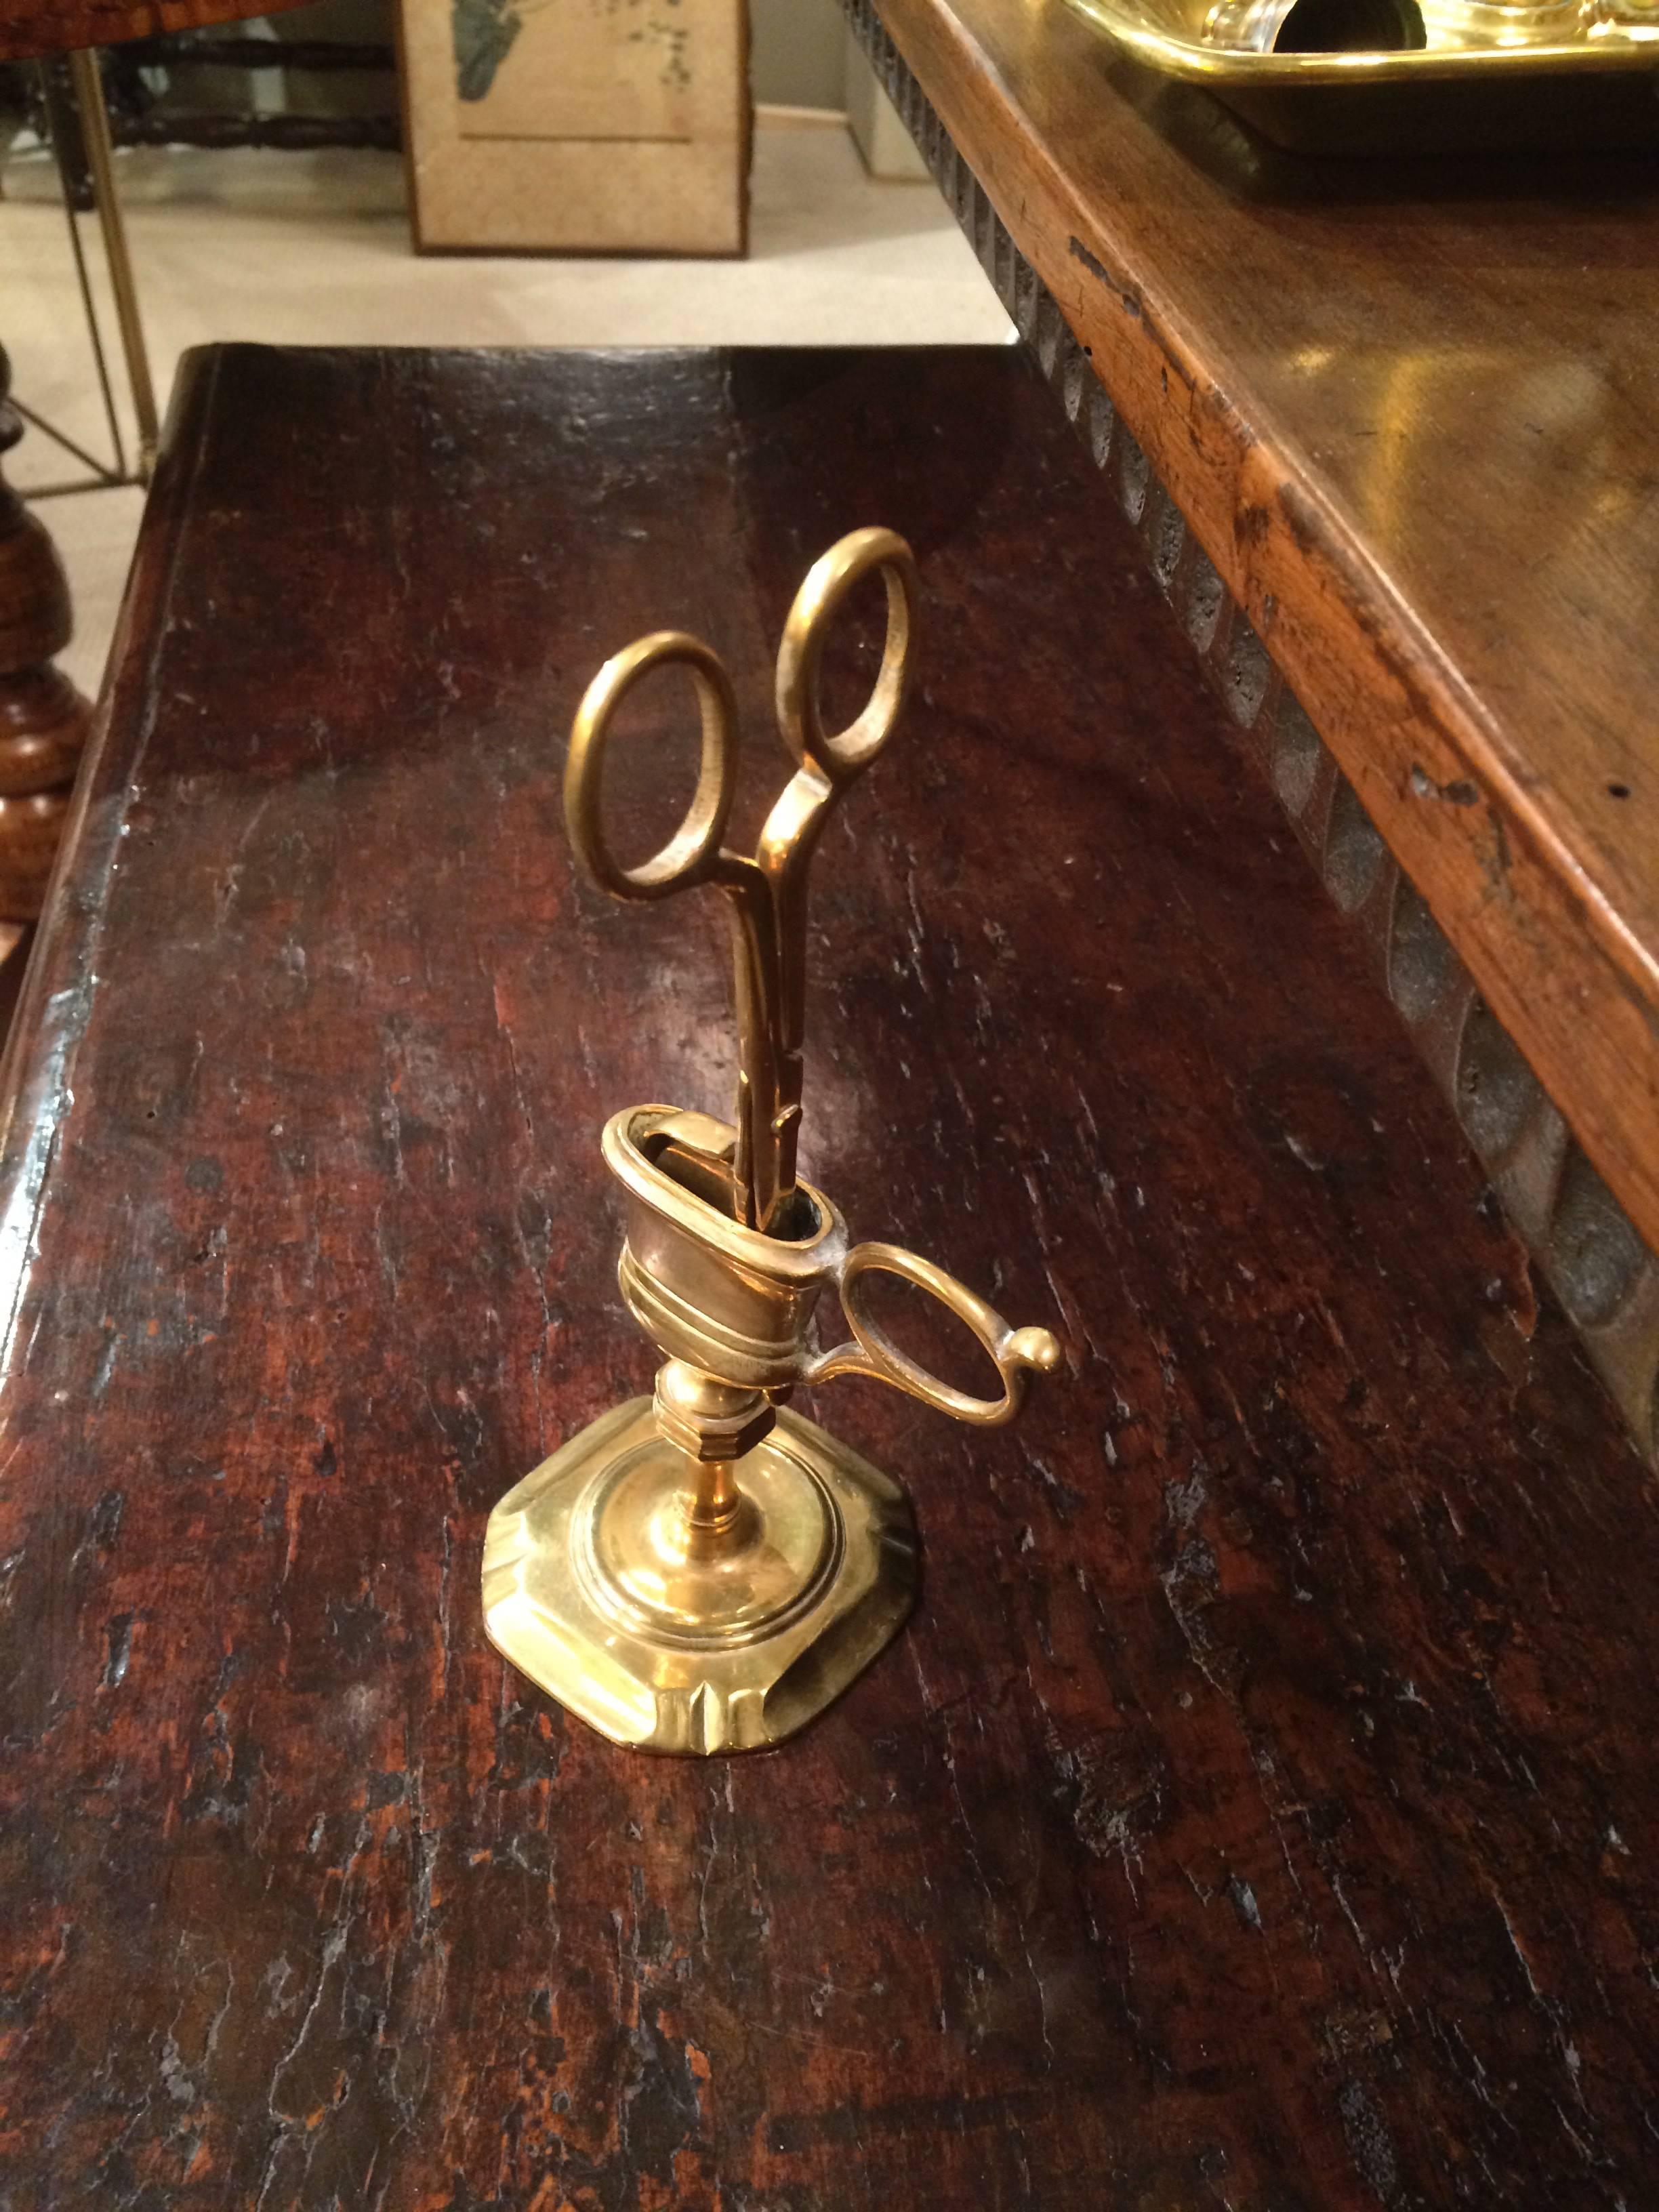 An English Queen Ann style brass candle snuffer with scissor-like handles and a pointed tip, which is accommodated vertically into the stand. With an octagonal based stand with a shaped handle. There are two holes in the bottom of the stand so that